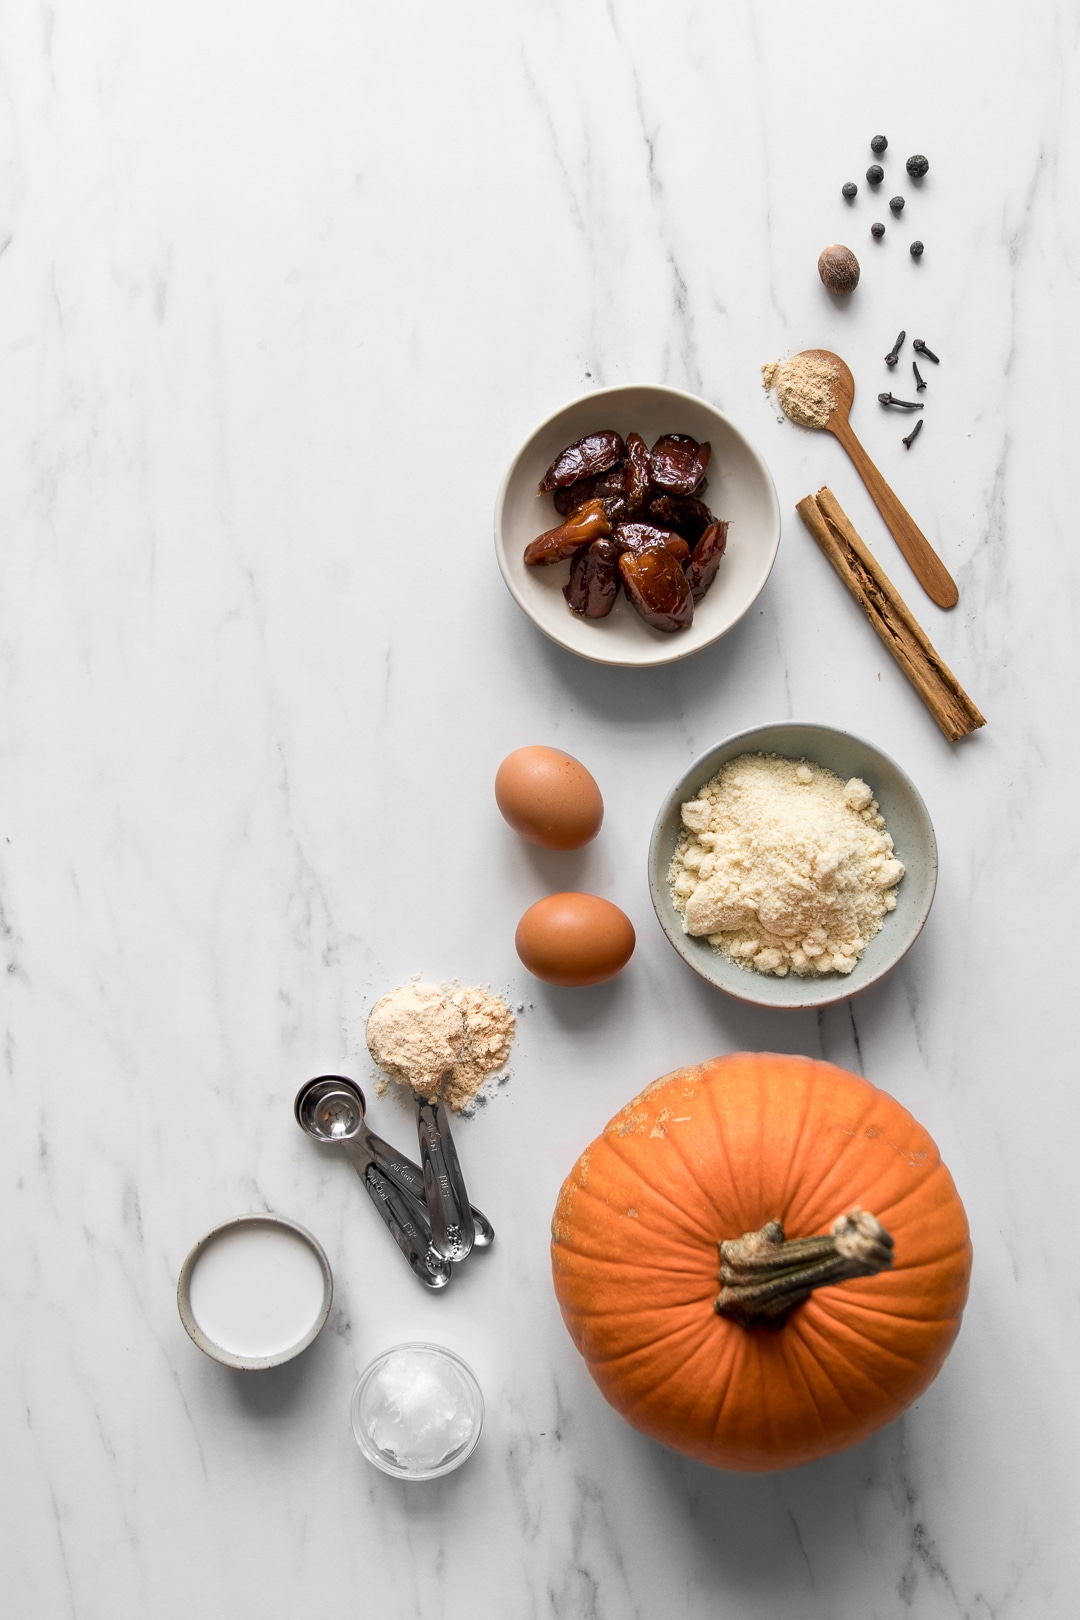 Ingredients for a whole30 pumpkin pie